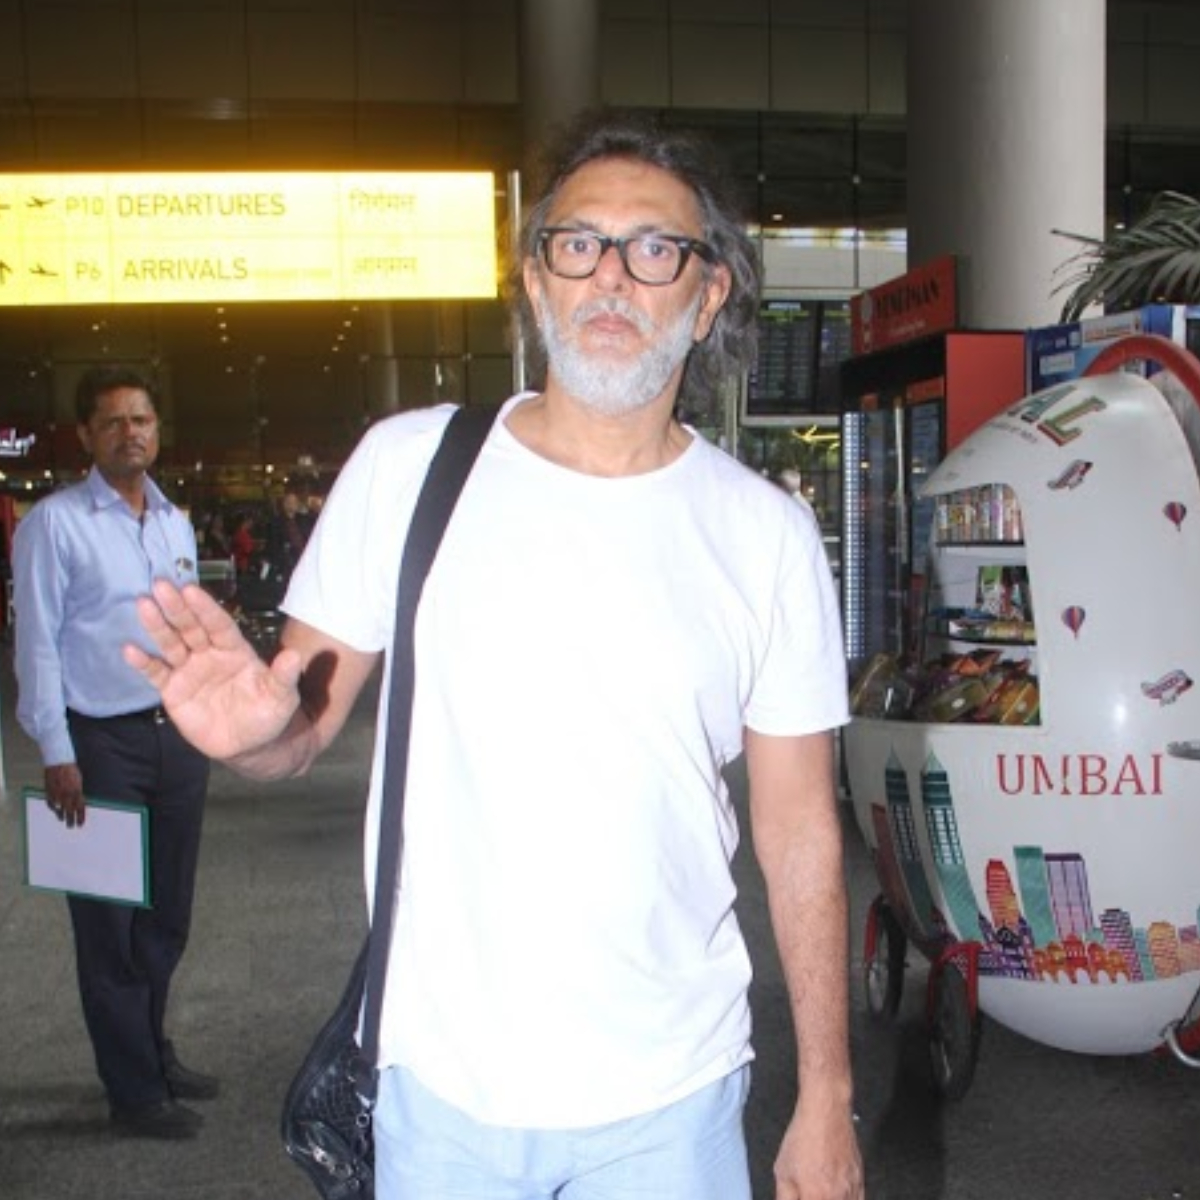 EXCLUSIVE: After Toofan, Rakeysh Omprakash Mehra to direct film on farmer issues; Delhi 6 writer penning story